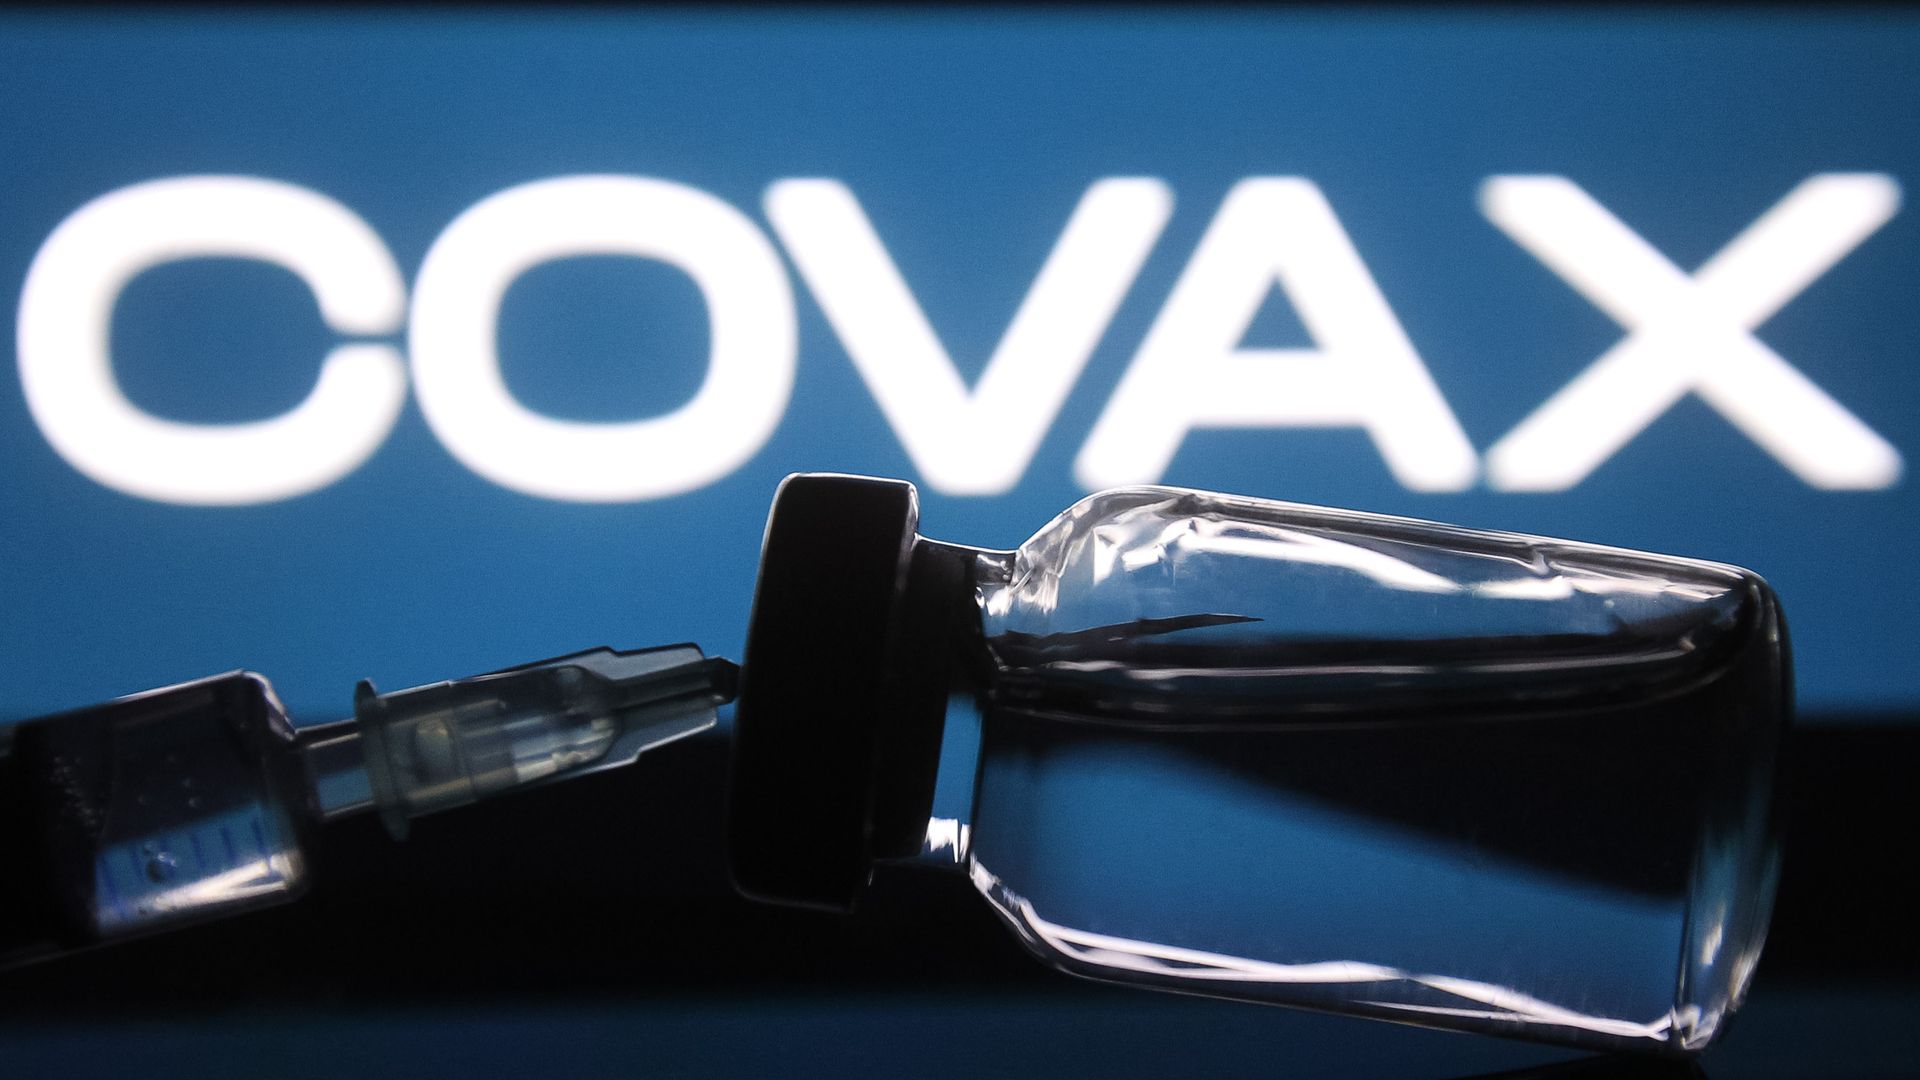 A medical syringe and a vial in front of the COVAX word are seen in this creative illustrative photo. 